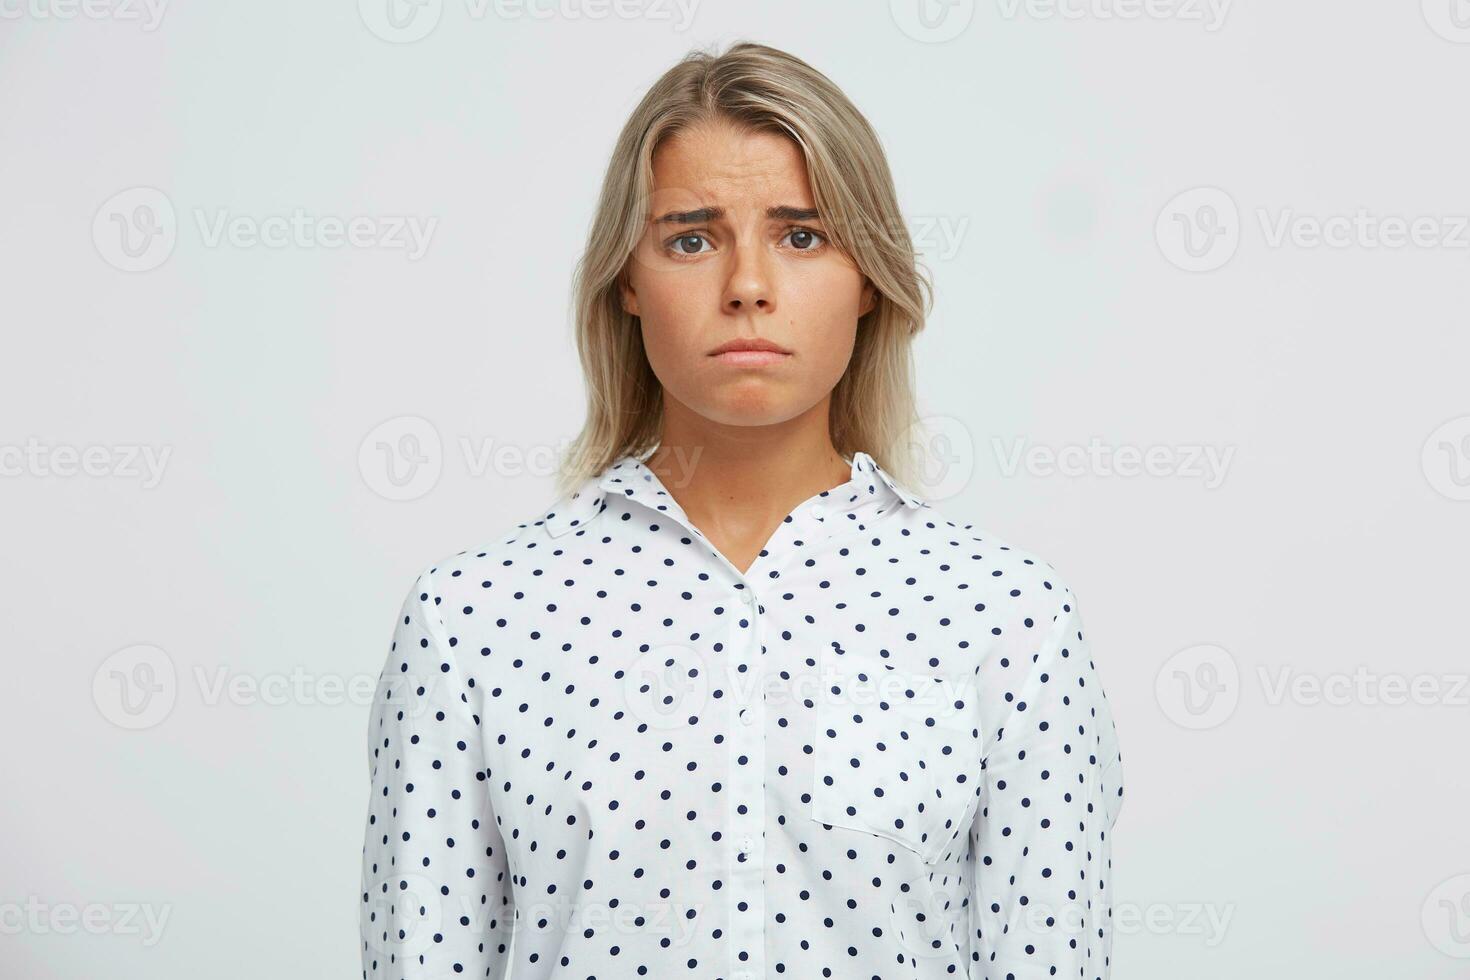 Closeup of sad depressed blonde young woman wears polka dot shirt feels upset and disappointed isolated over white background Looks directly in camera photo